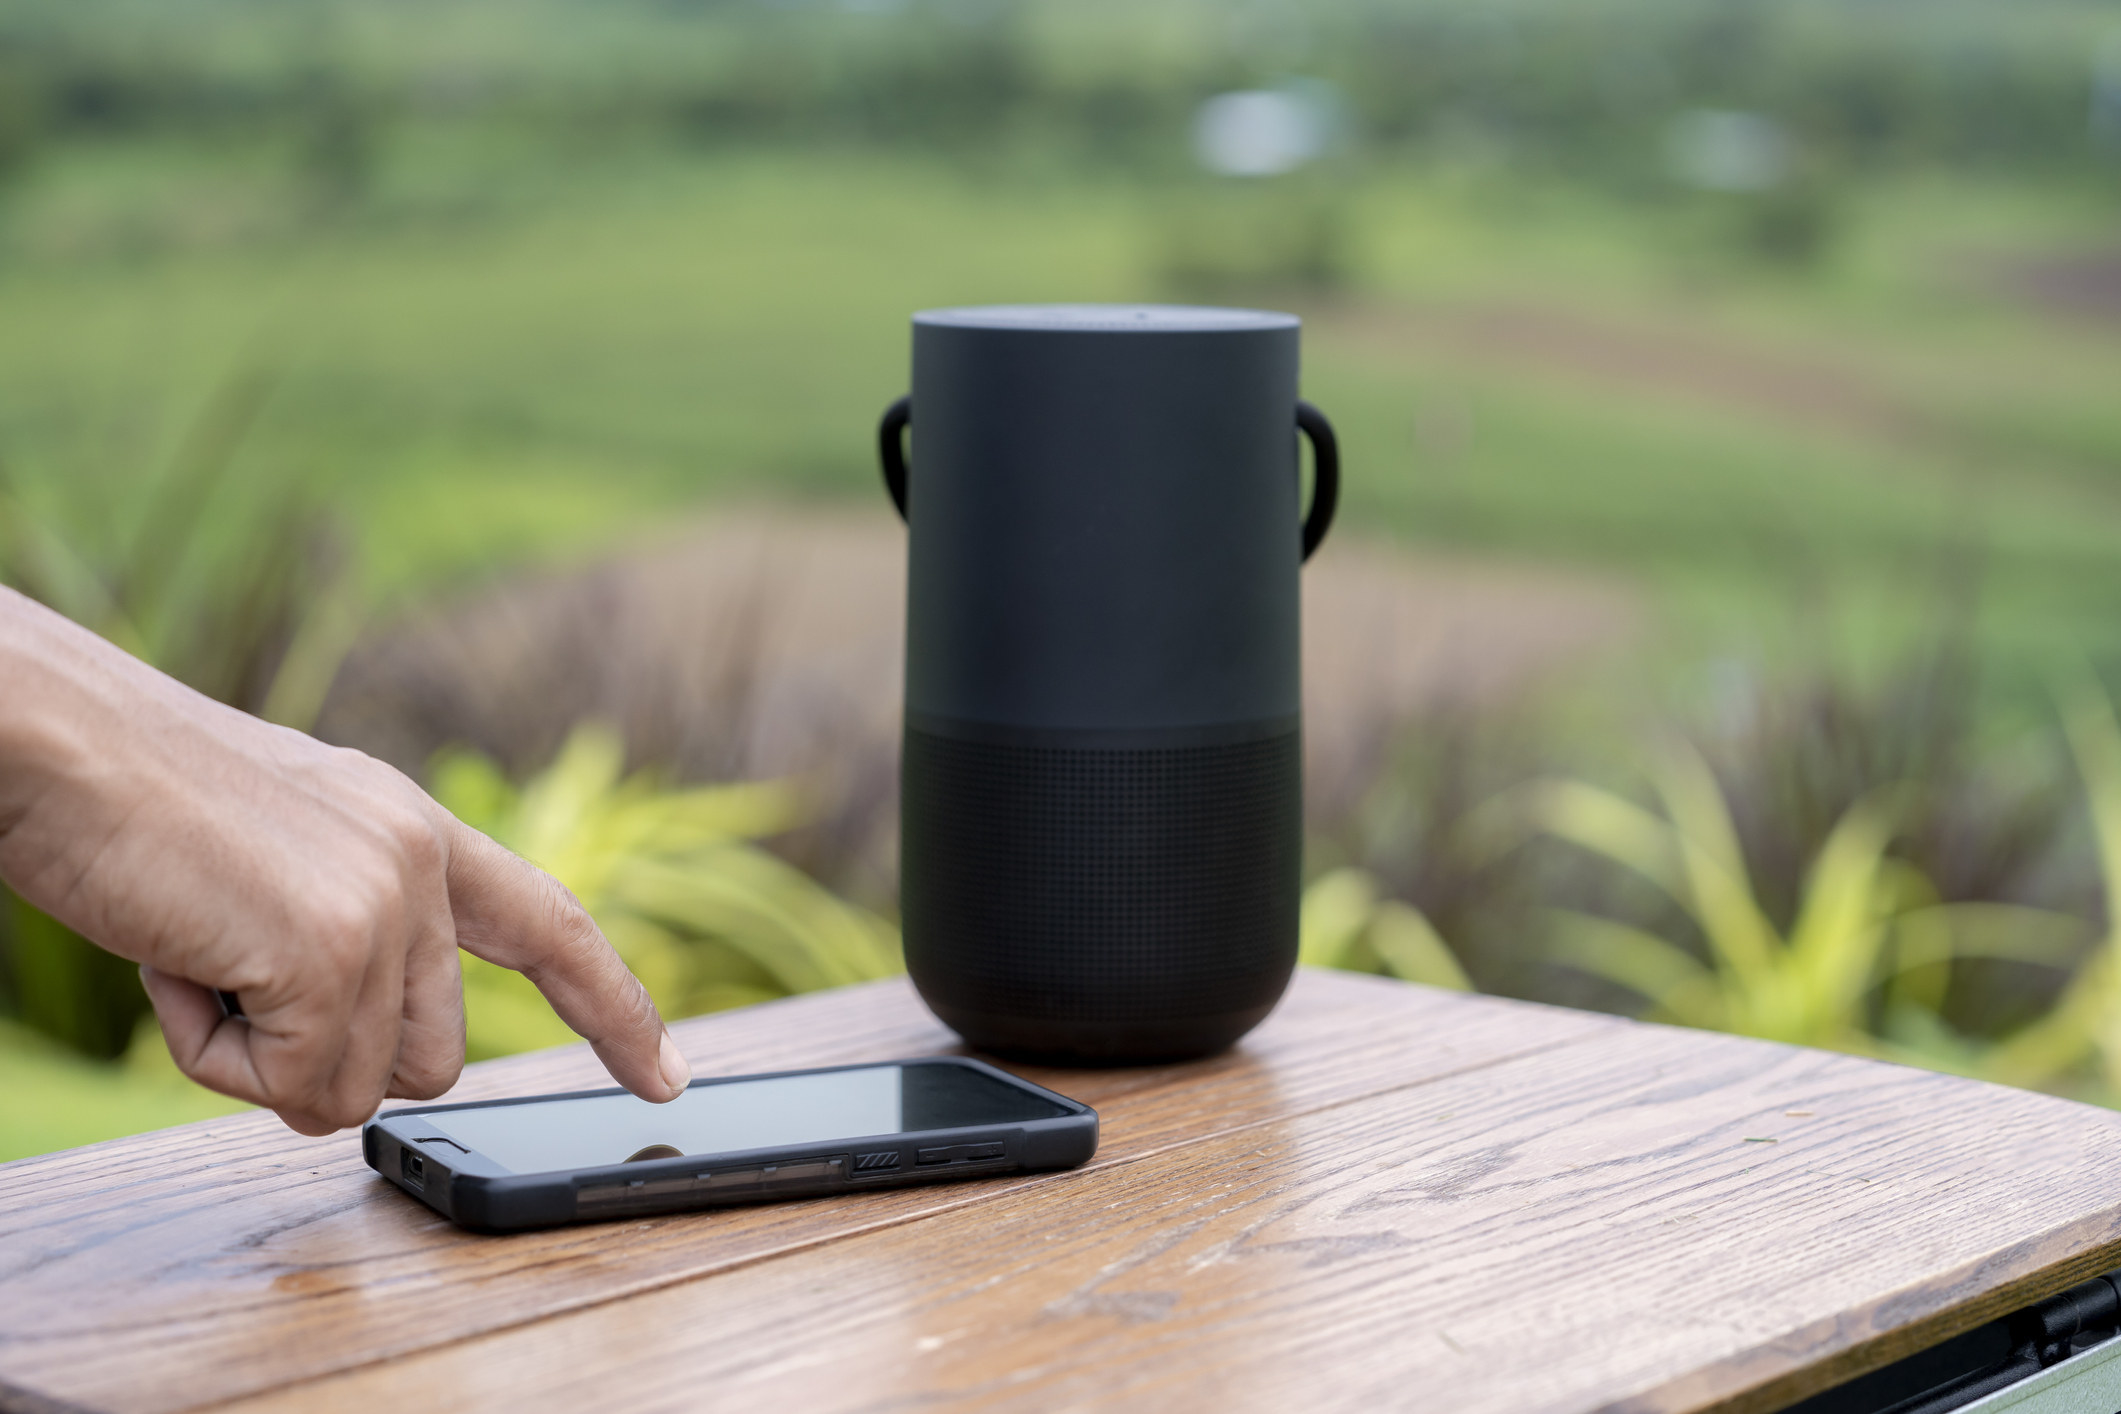 Hand touches a screen on smartphone with portable speaker outdoors